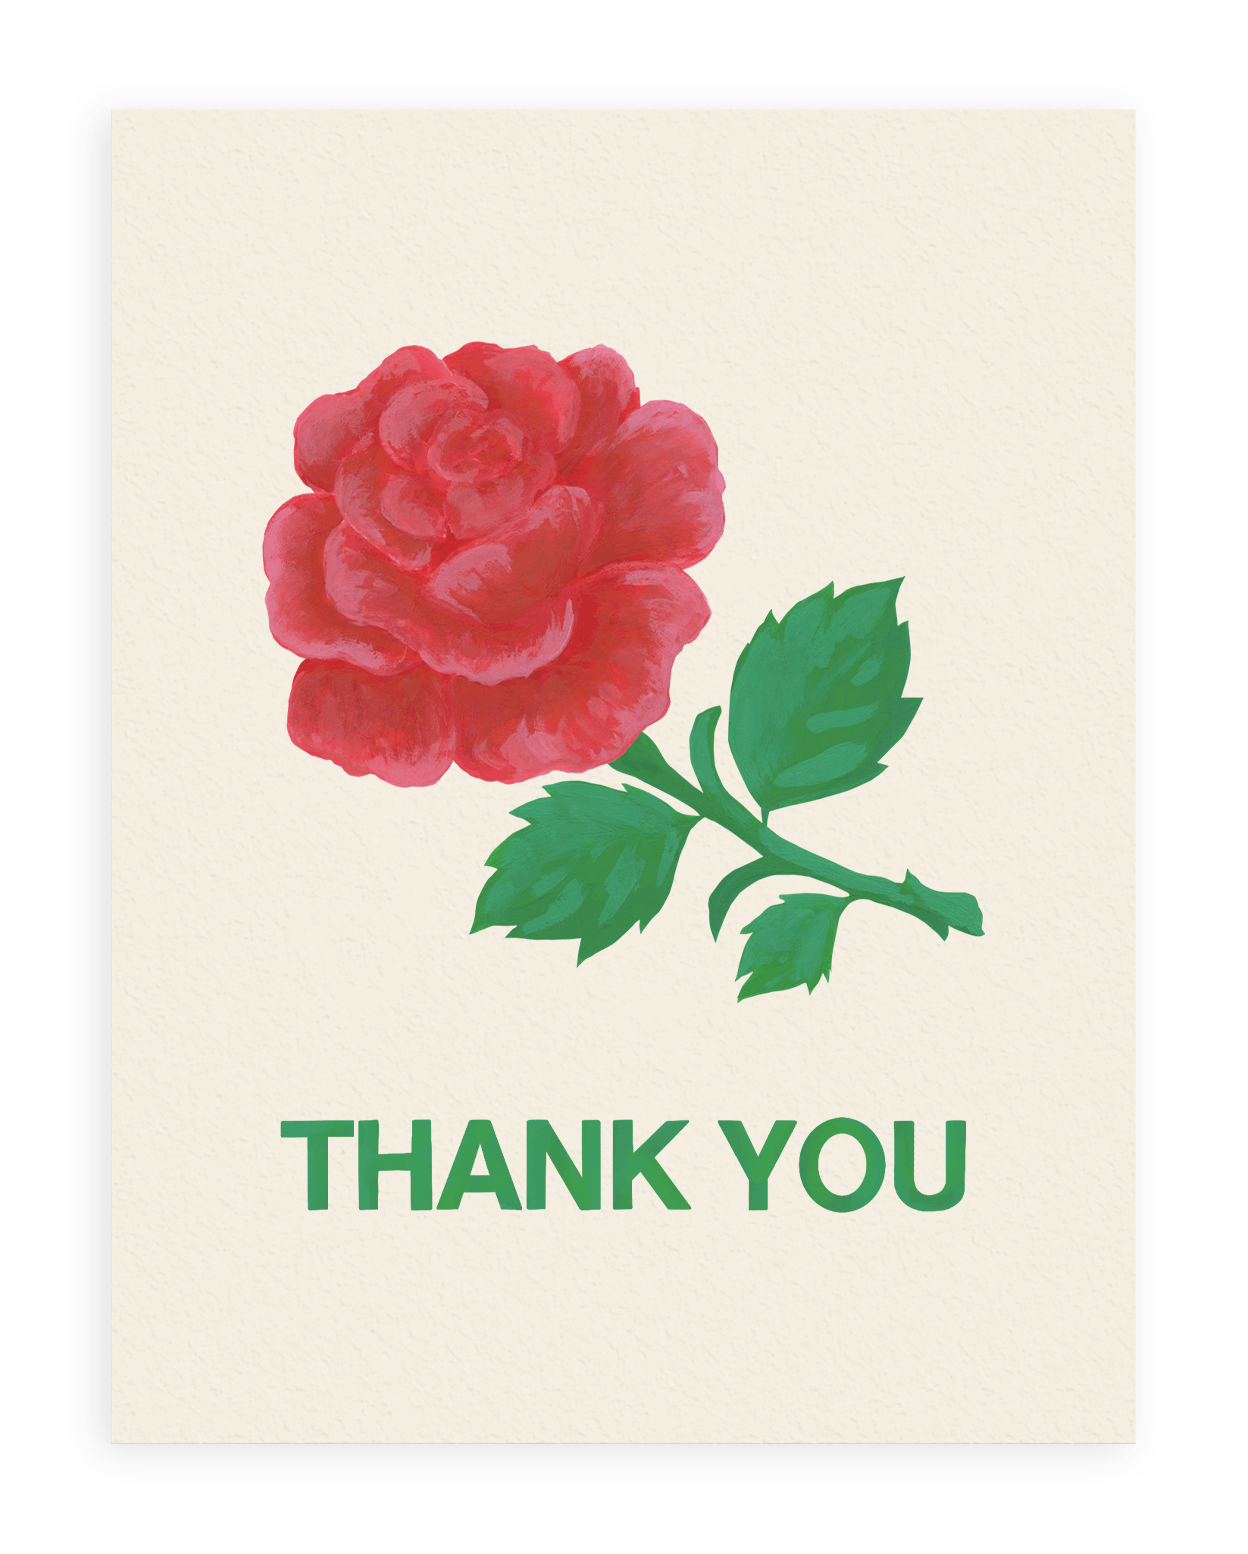  Cream colored background featuring a big red rose with a green stem and leaves, below it is written in green-colored font &quot;Thank You&quot; printed on cardstock against a white background.